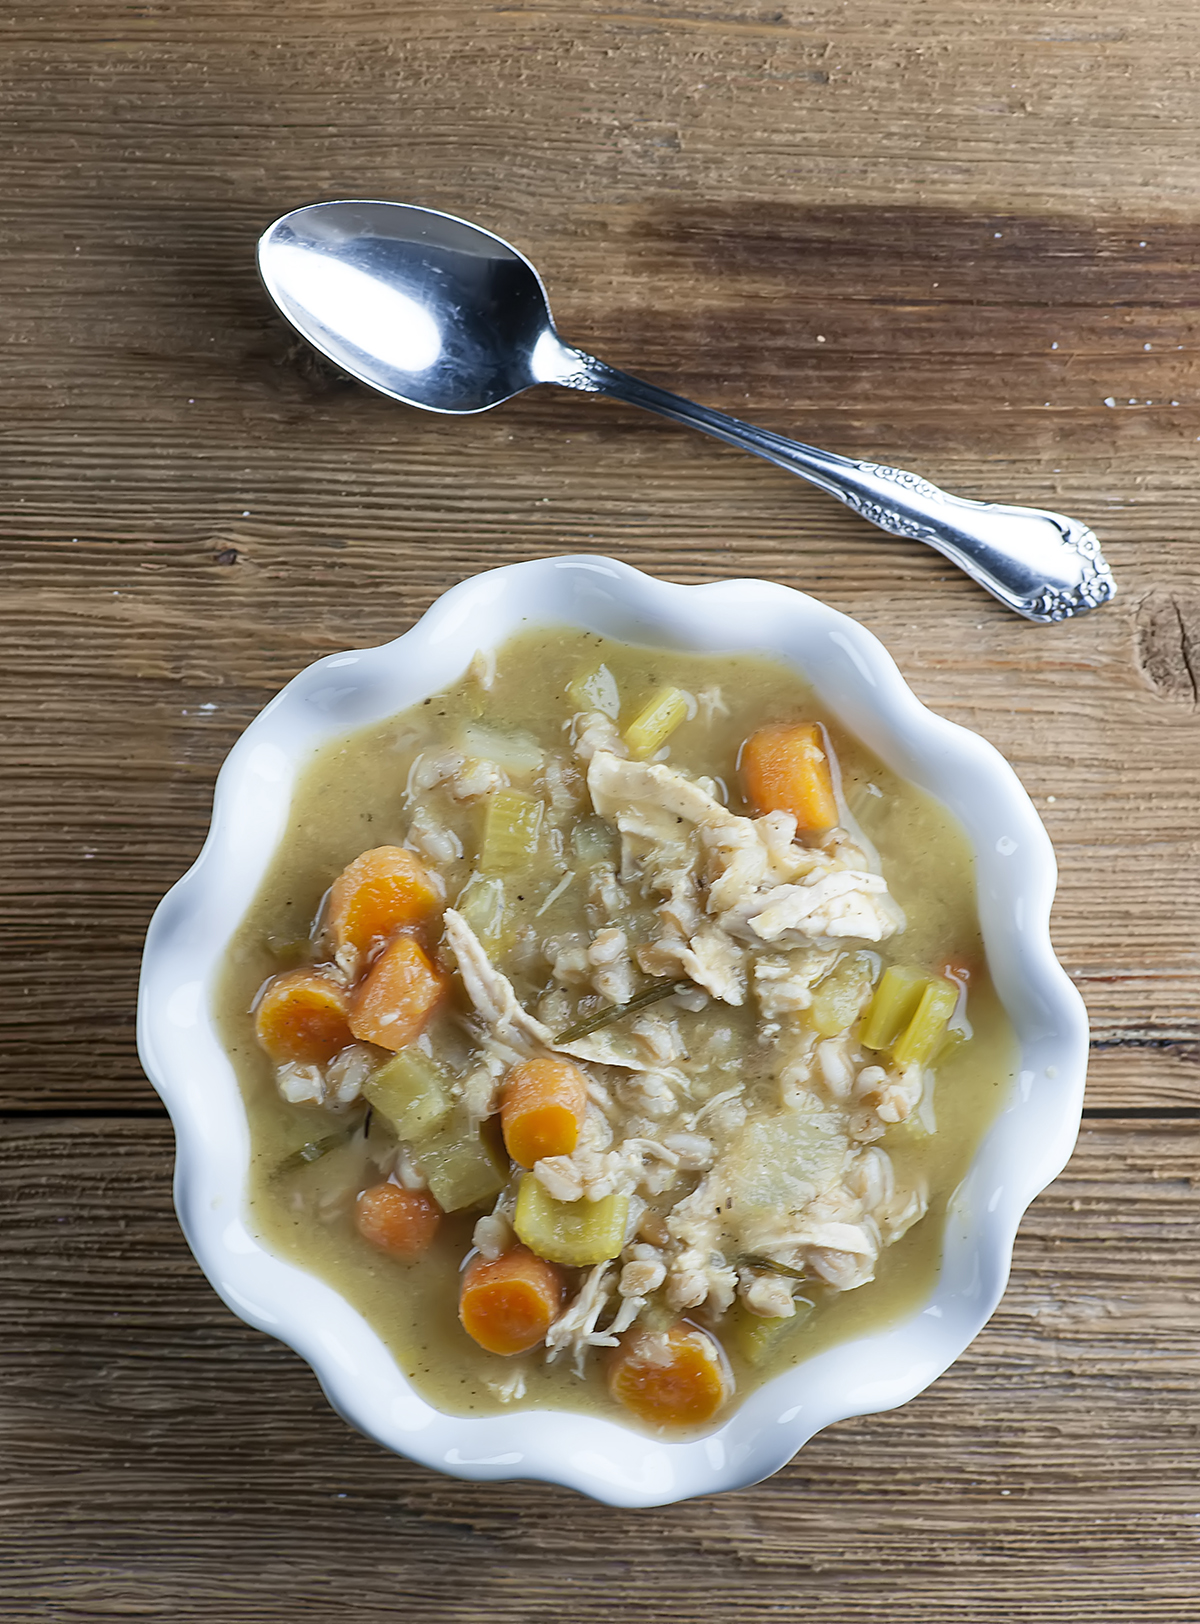 Rosemary chicken soup in a bowl with a spoon.